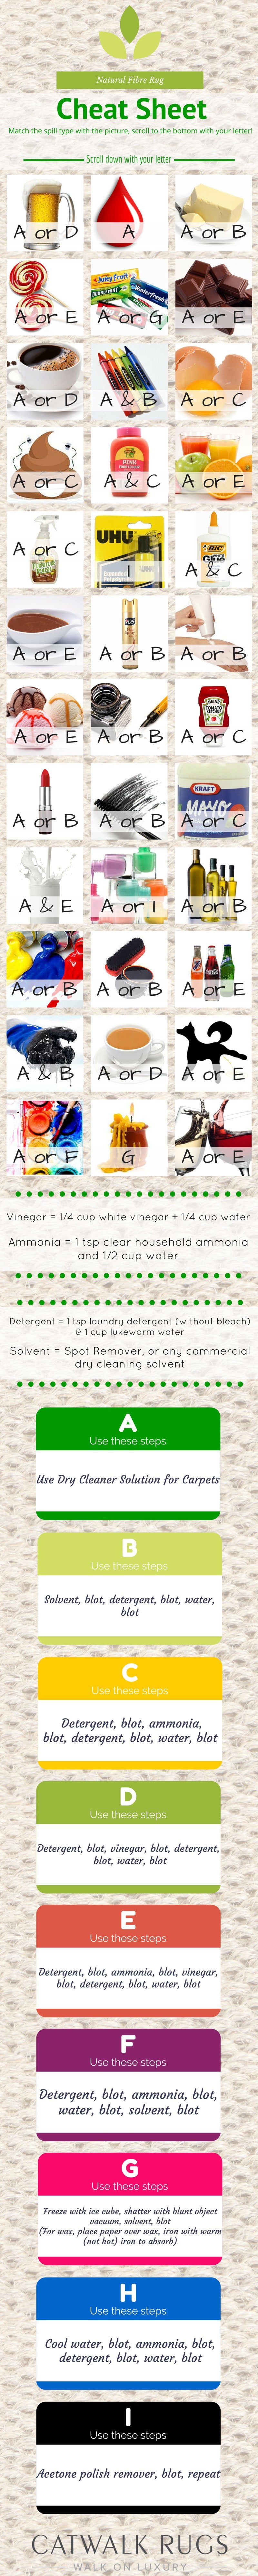 Jute Rug Cleaning Guide Infographic